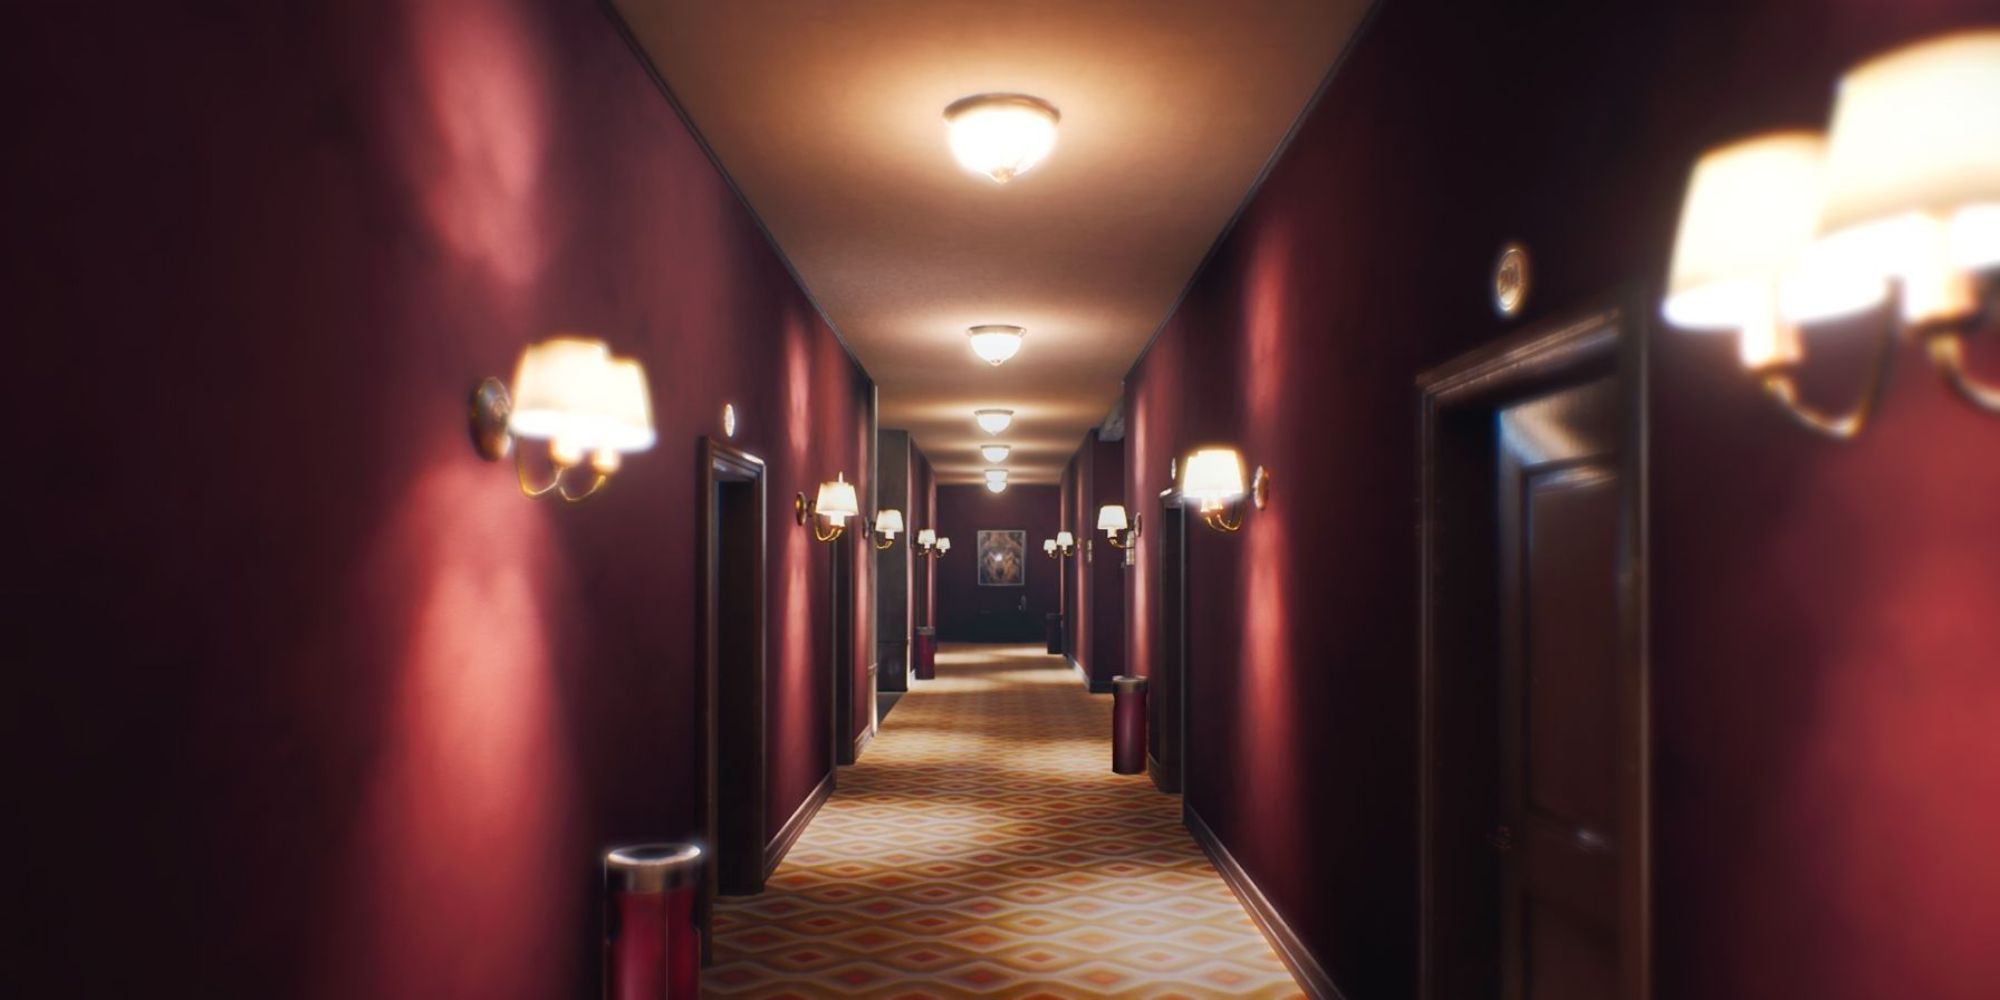 The corridors of the Timberline Hotel